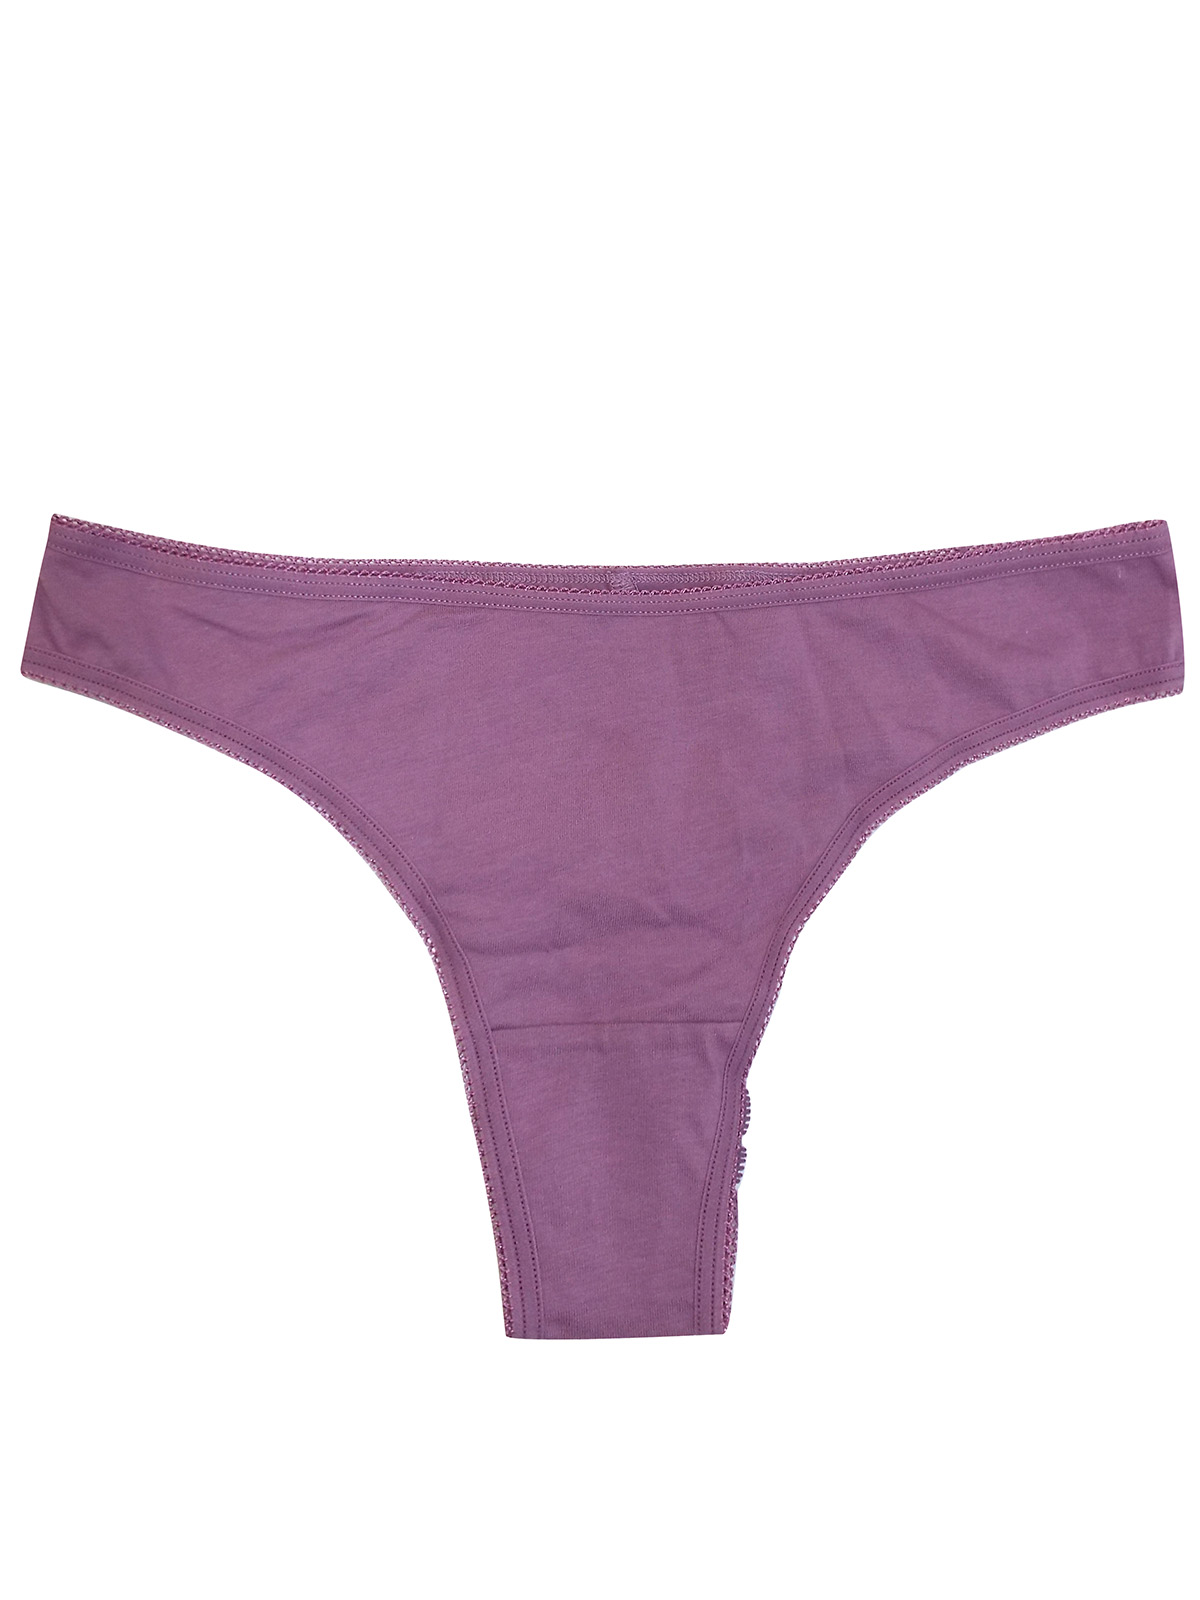 George - - G3ORGE LAVENDER 5-Pack Lace Brazilian Knickers - Size 10 to 16